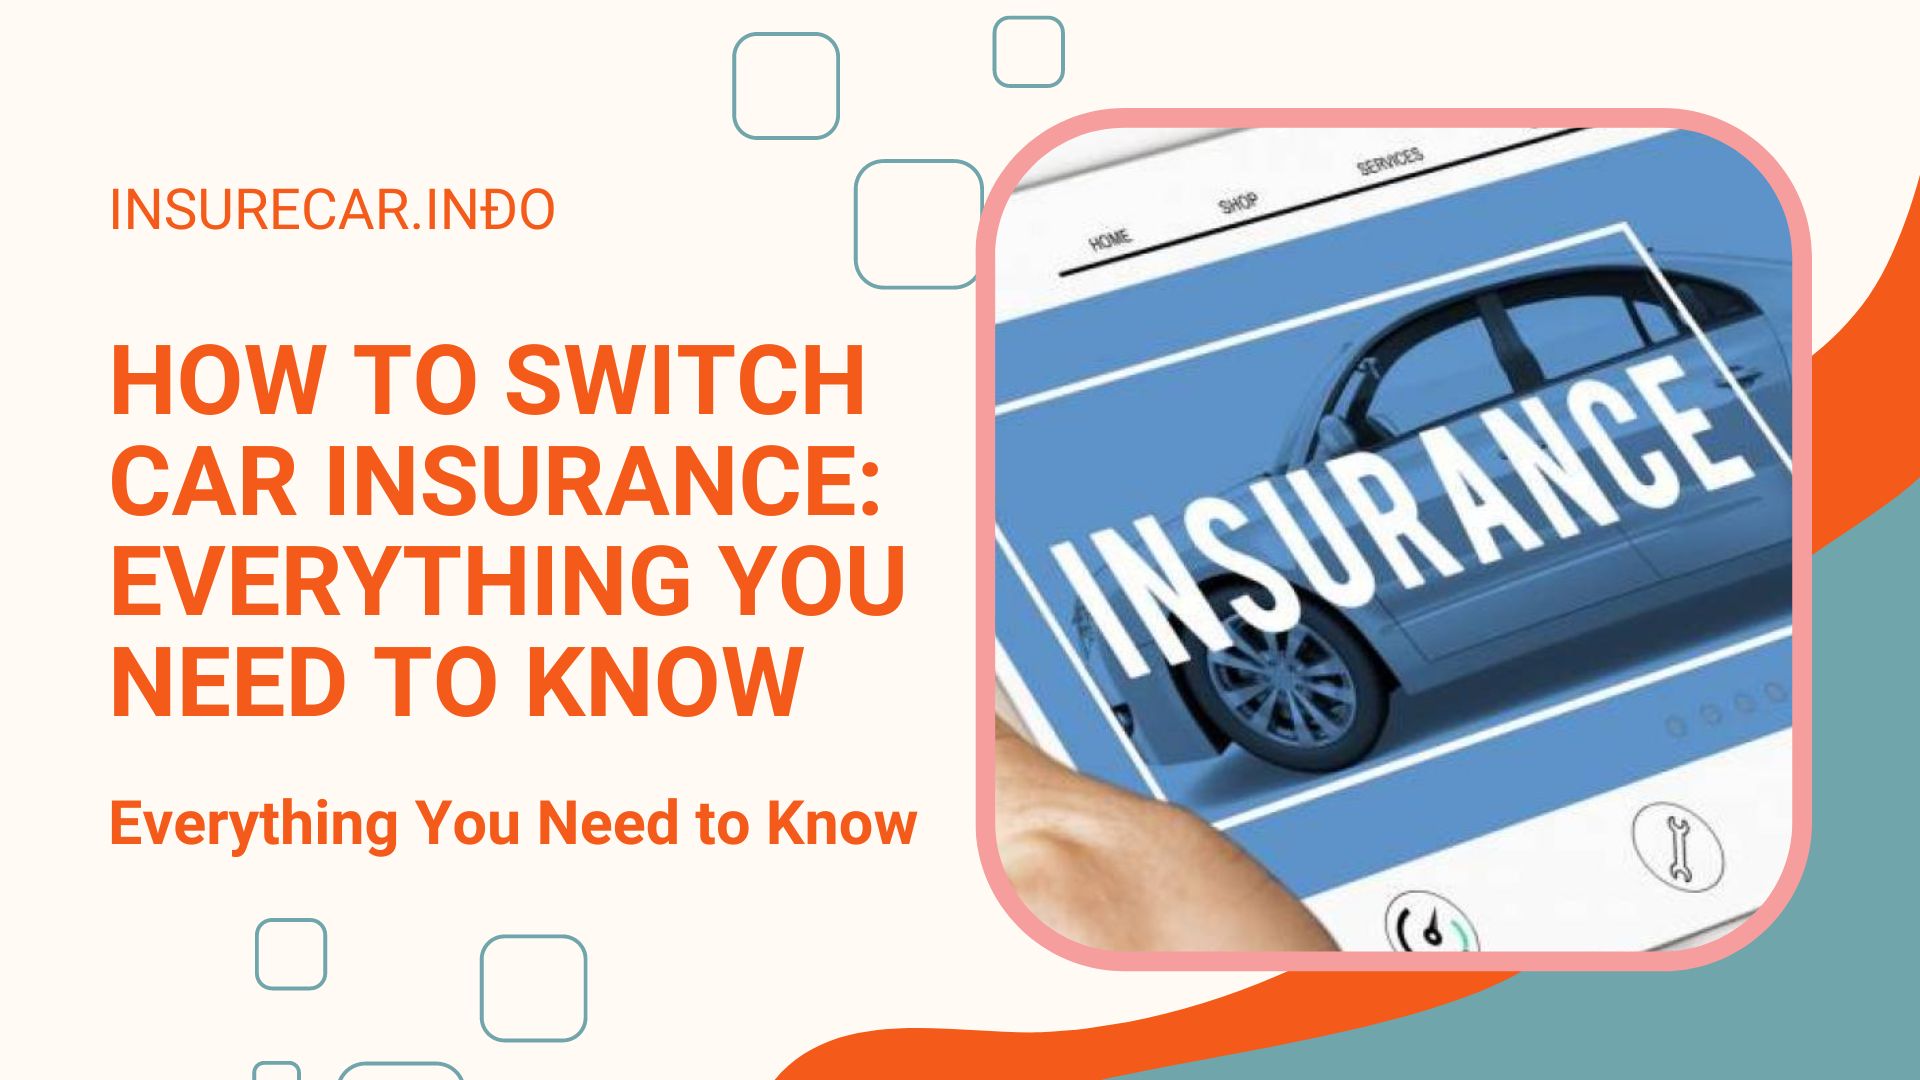 How to Switch Car Insurance: Everything You Need to Know